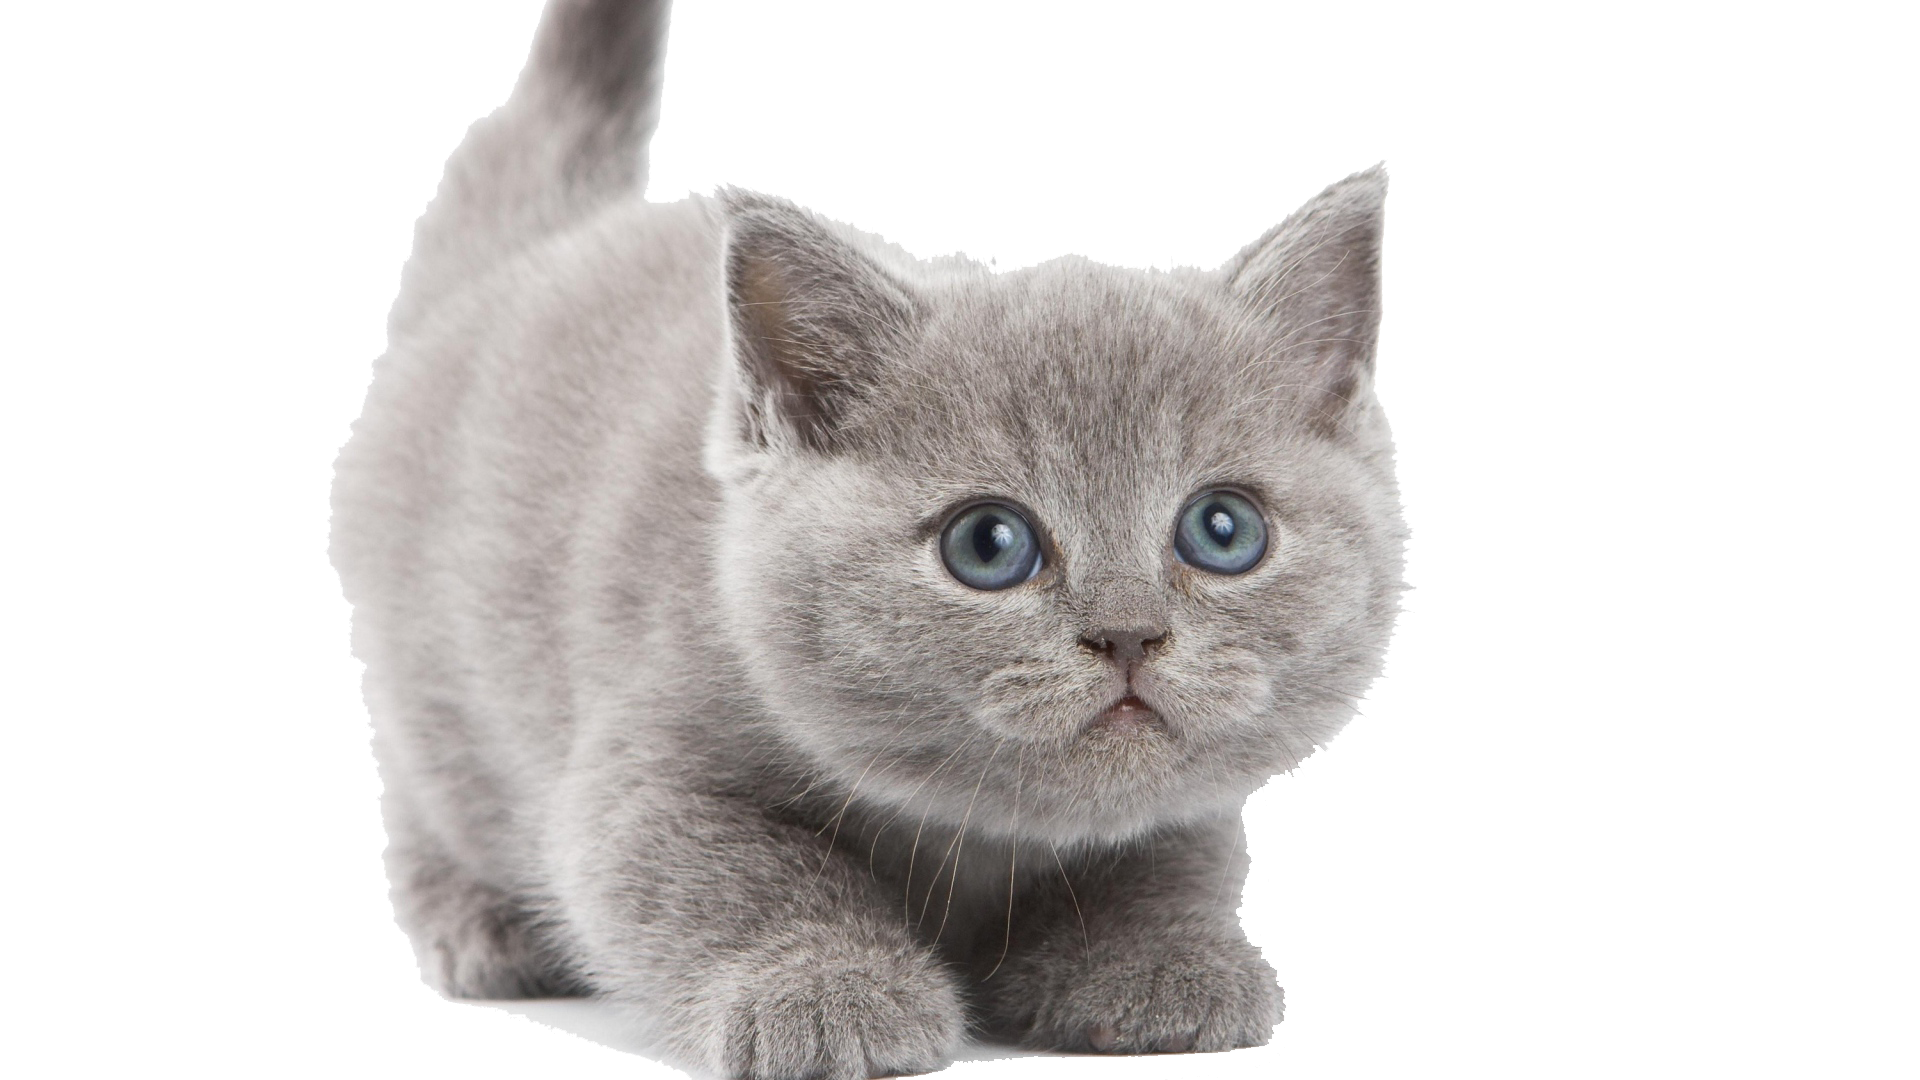 Cats png free images download